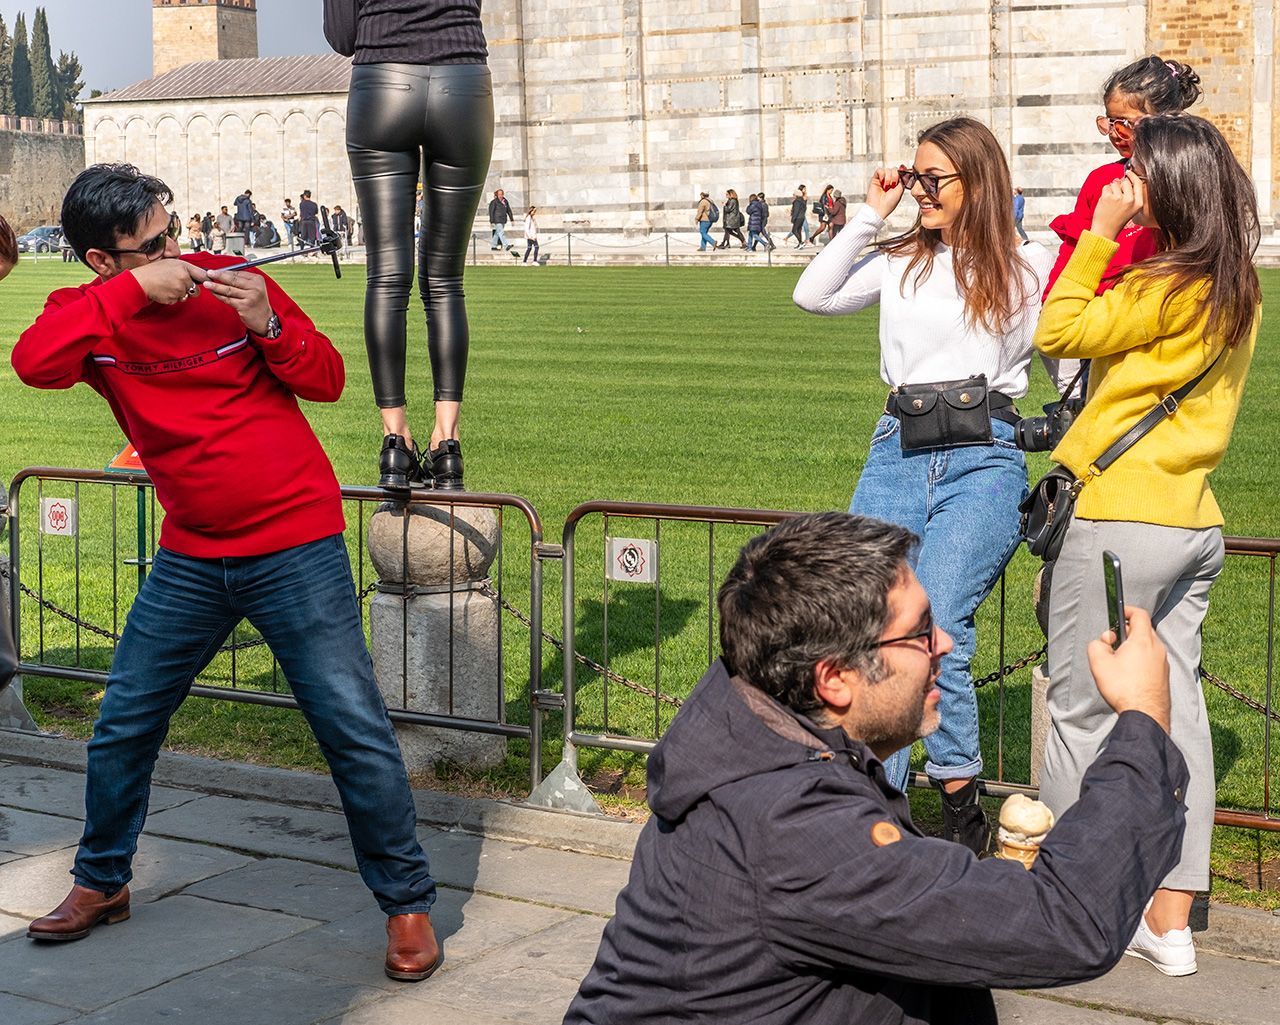 Visitors pose in front of the Campanile (the Leaning Tower) in Pisa, Italia.